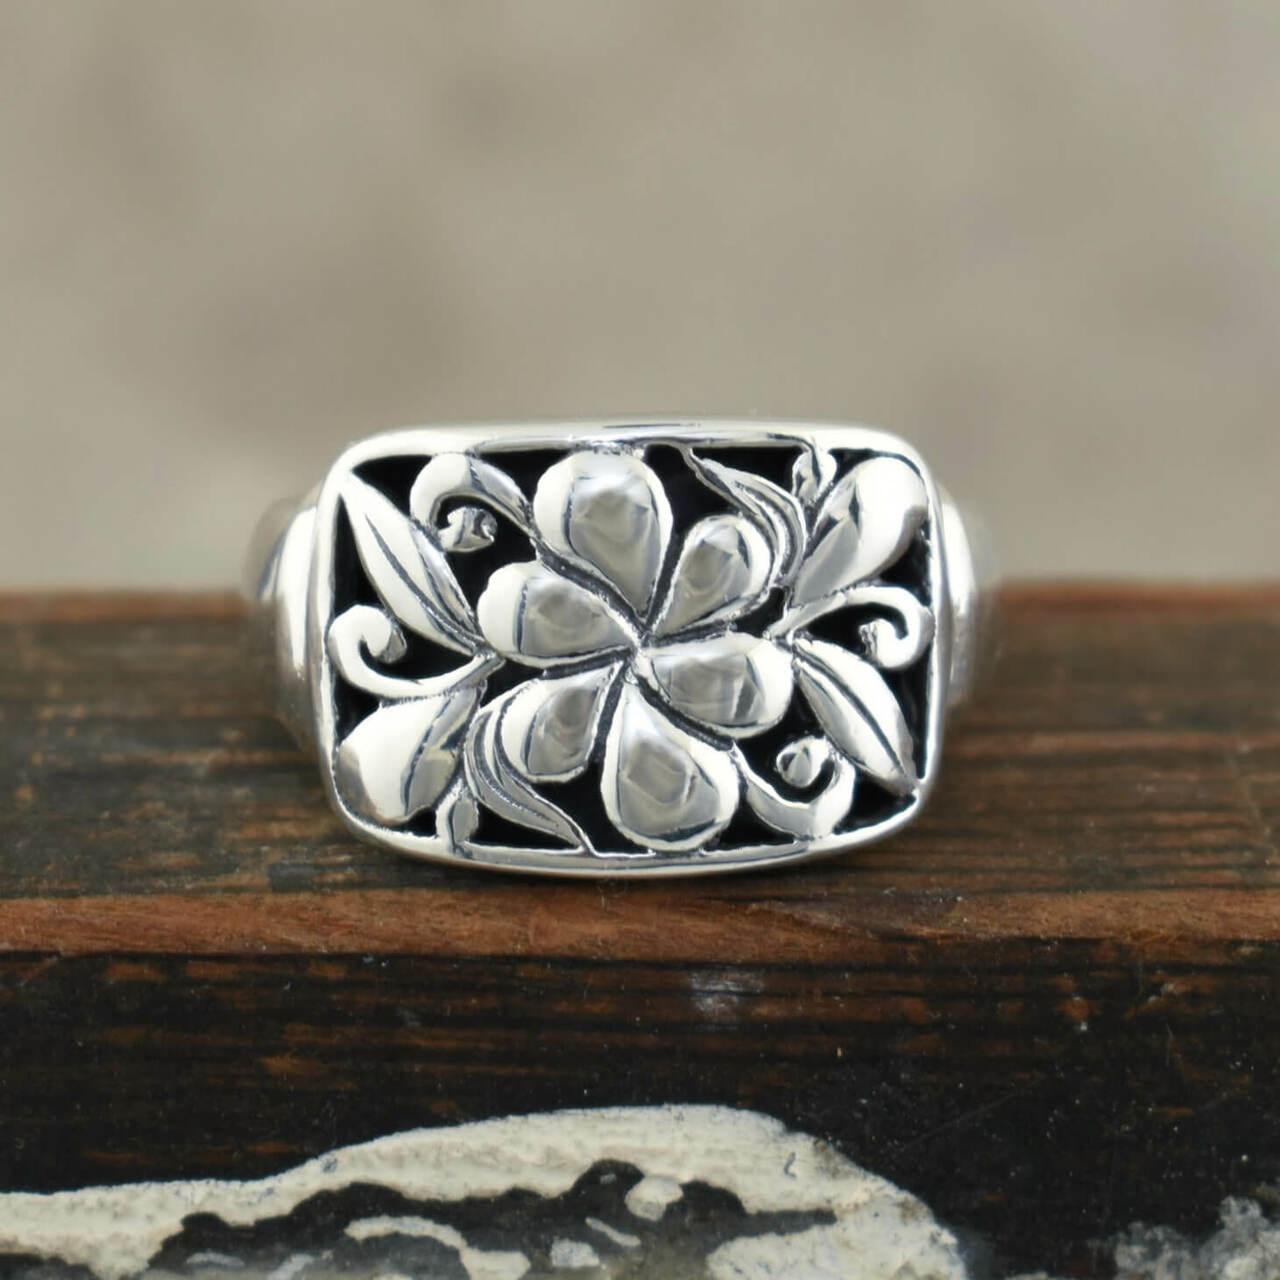 .925 sterling silver Venice Ring with oxidation